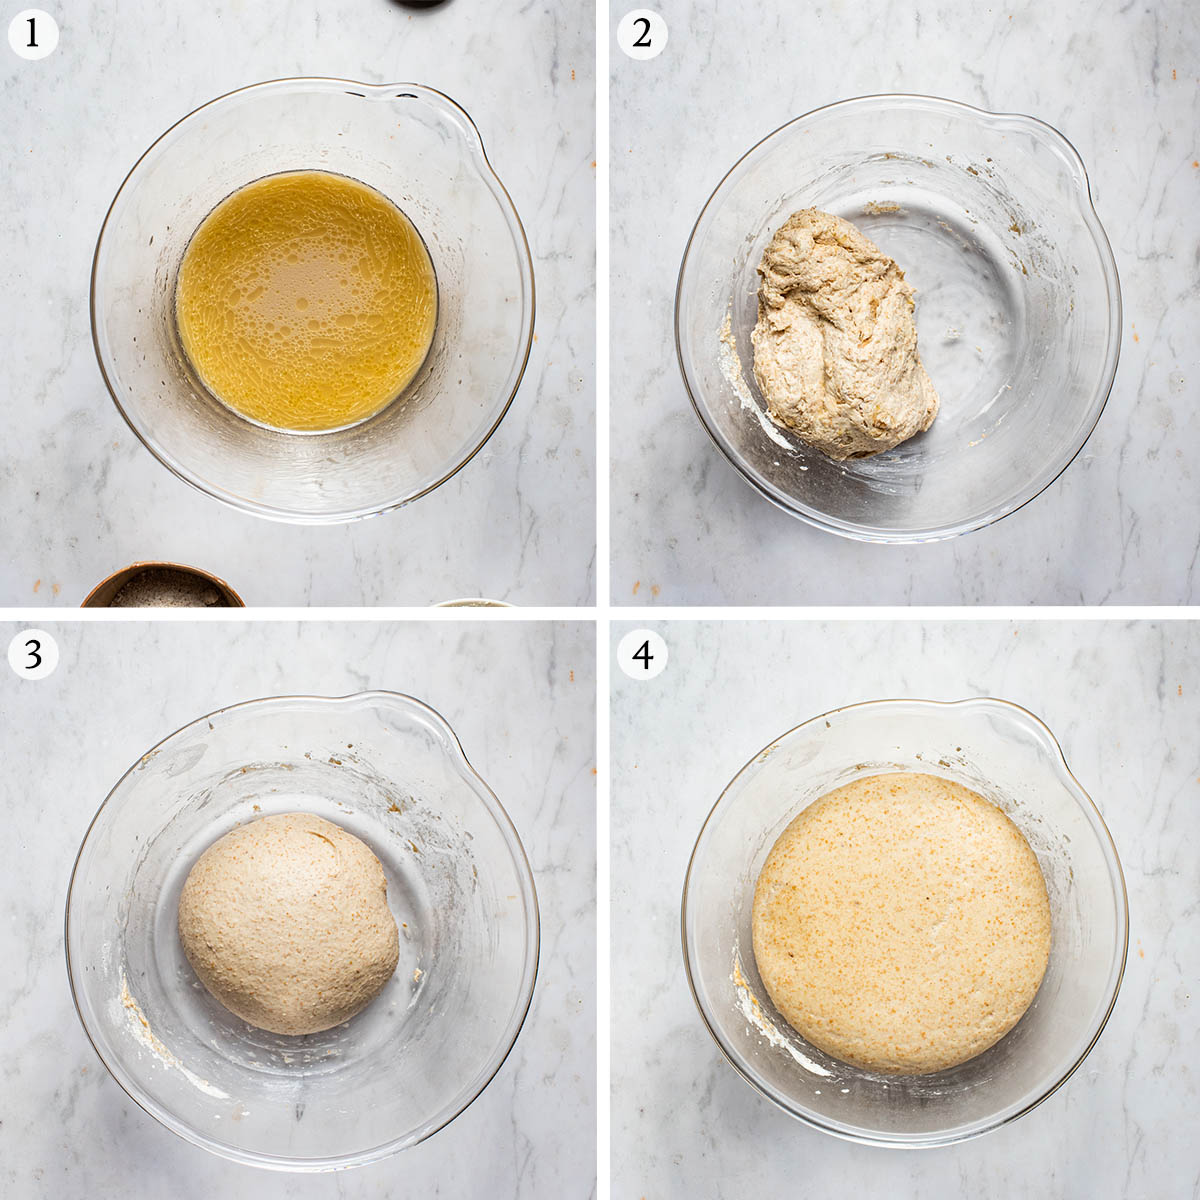 Pizza dough steps 1 to 4.